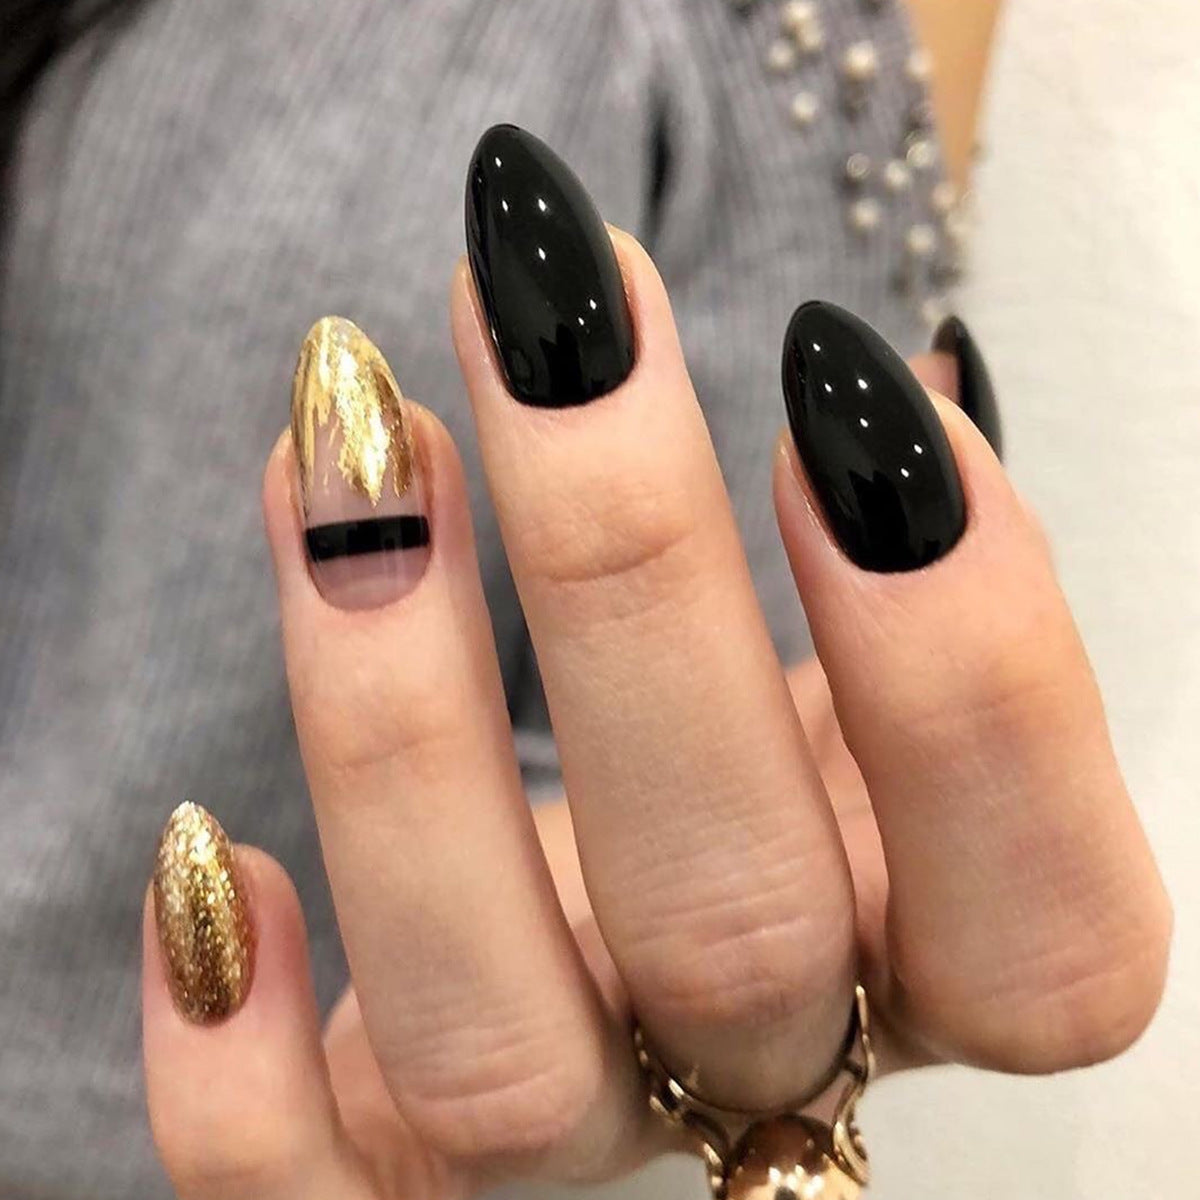 Black Nails With Gold Glitter- Medium Stiletto Press On Nails Stick On Nails Fake Nails Artificial Nails India | Gush Beauty